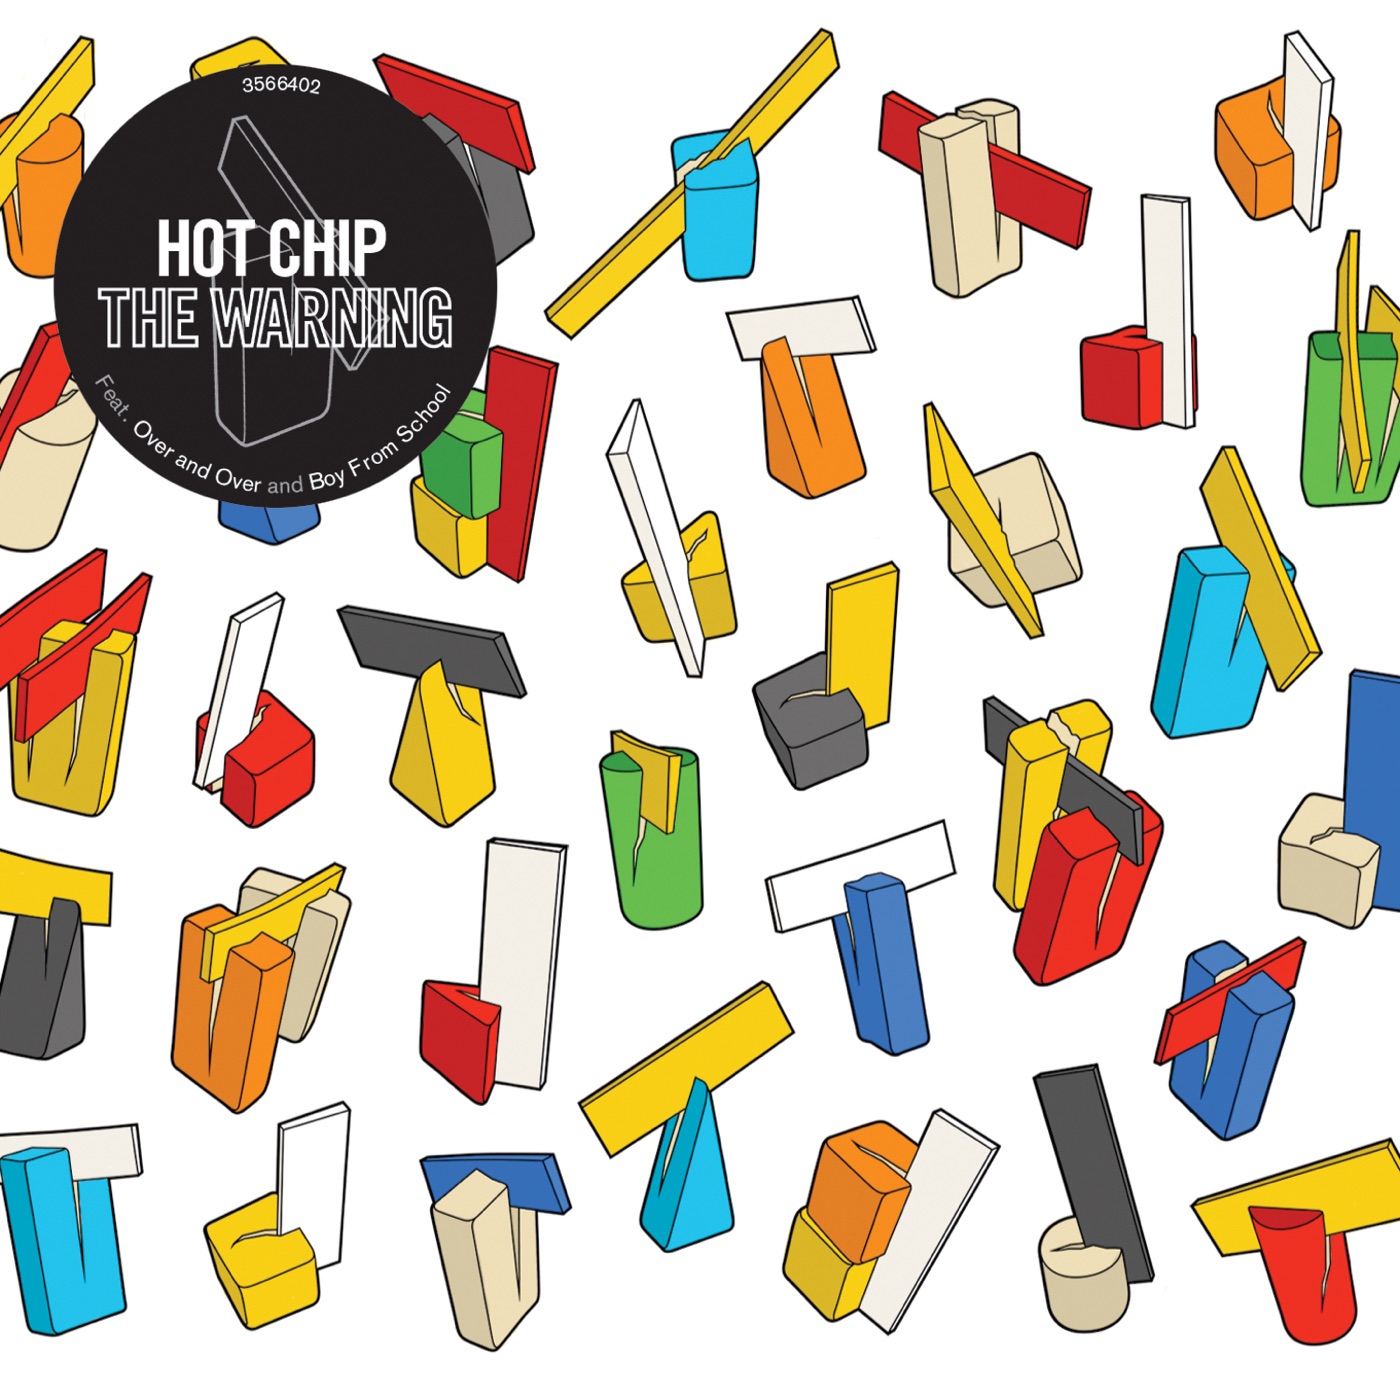 The Warning by Hot Chip